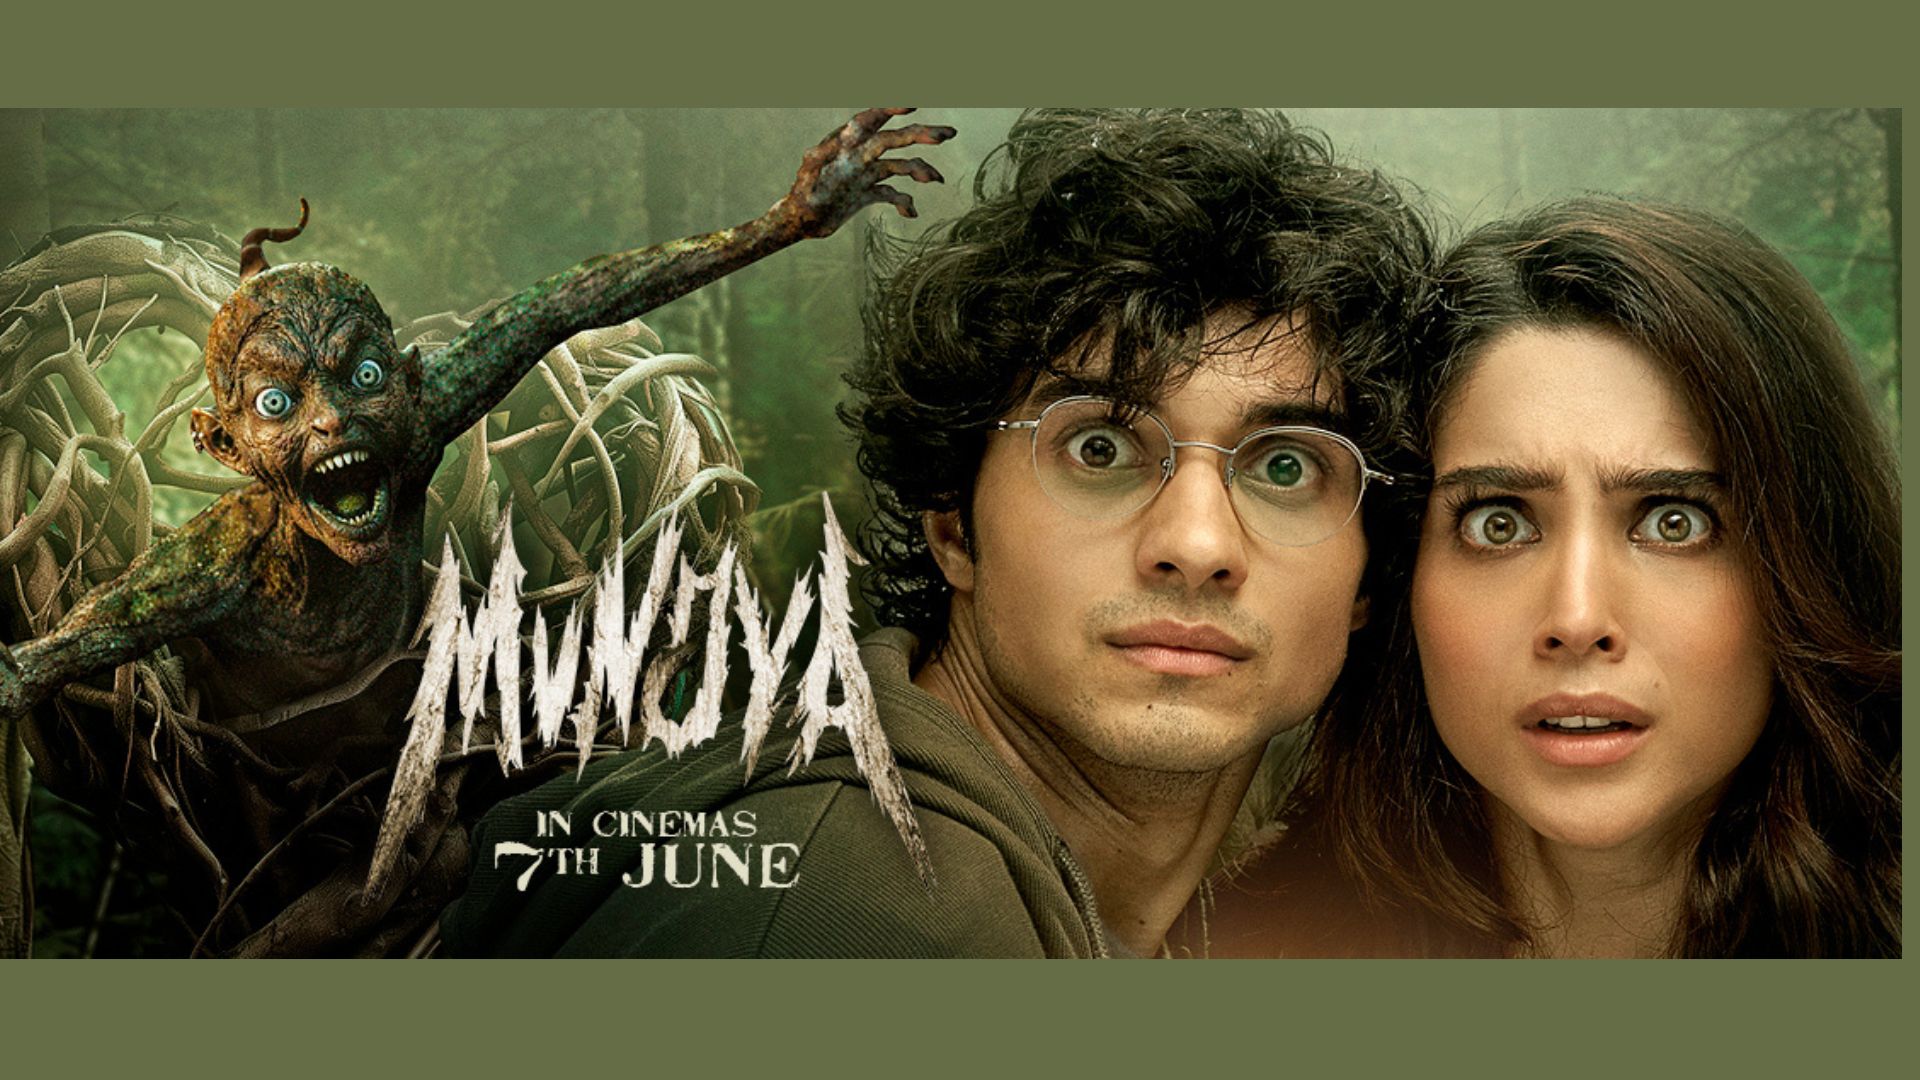 Munjya Box office collection: The revenue generated by the film Munjya is consistently on the rise.